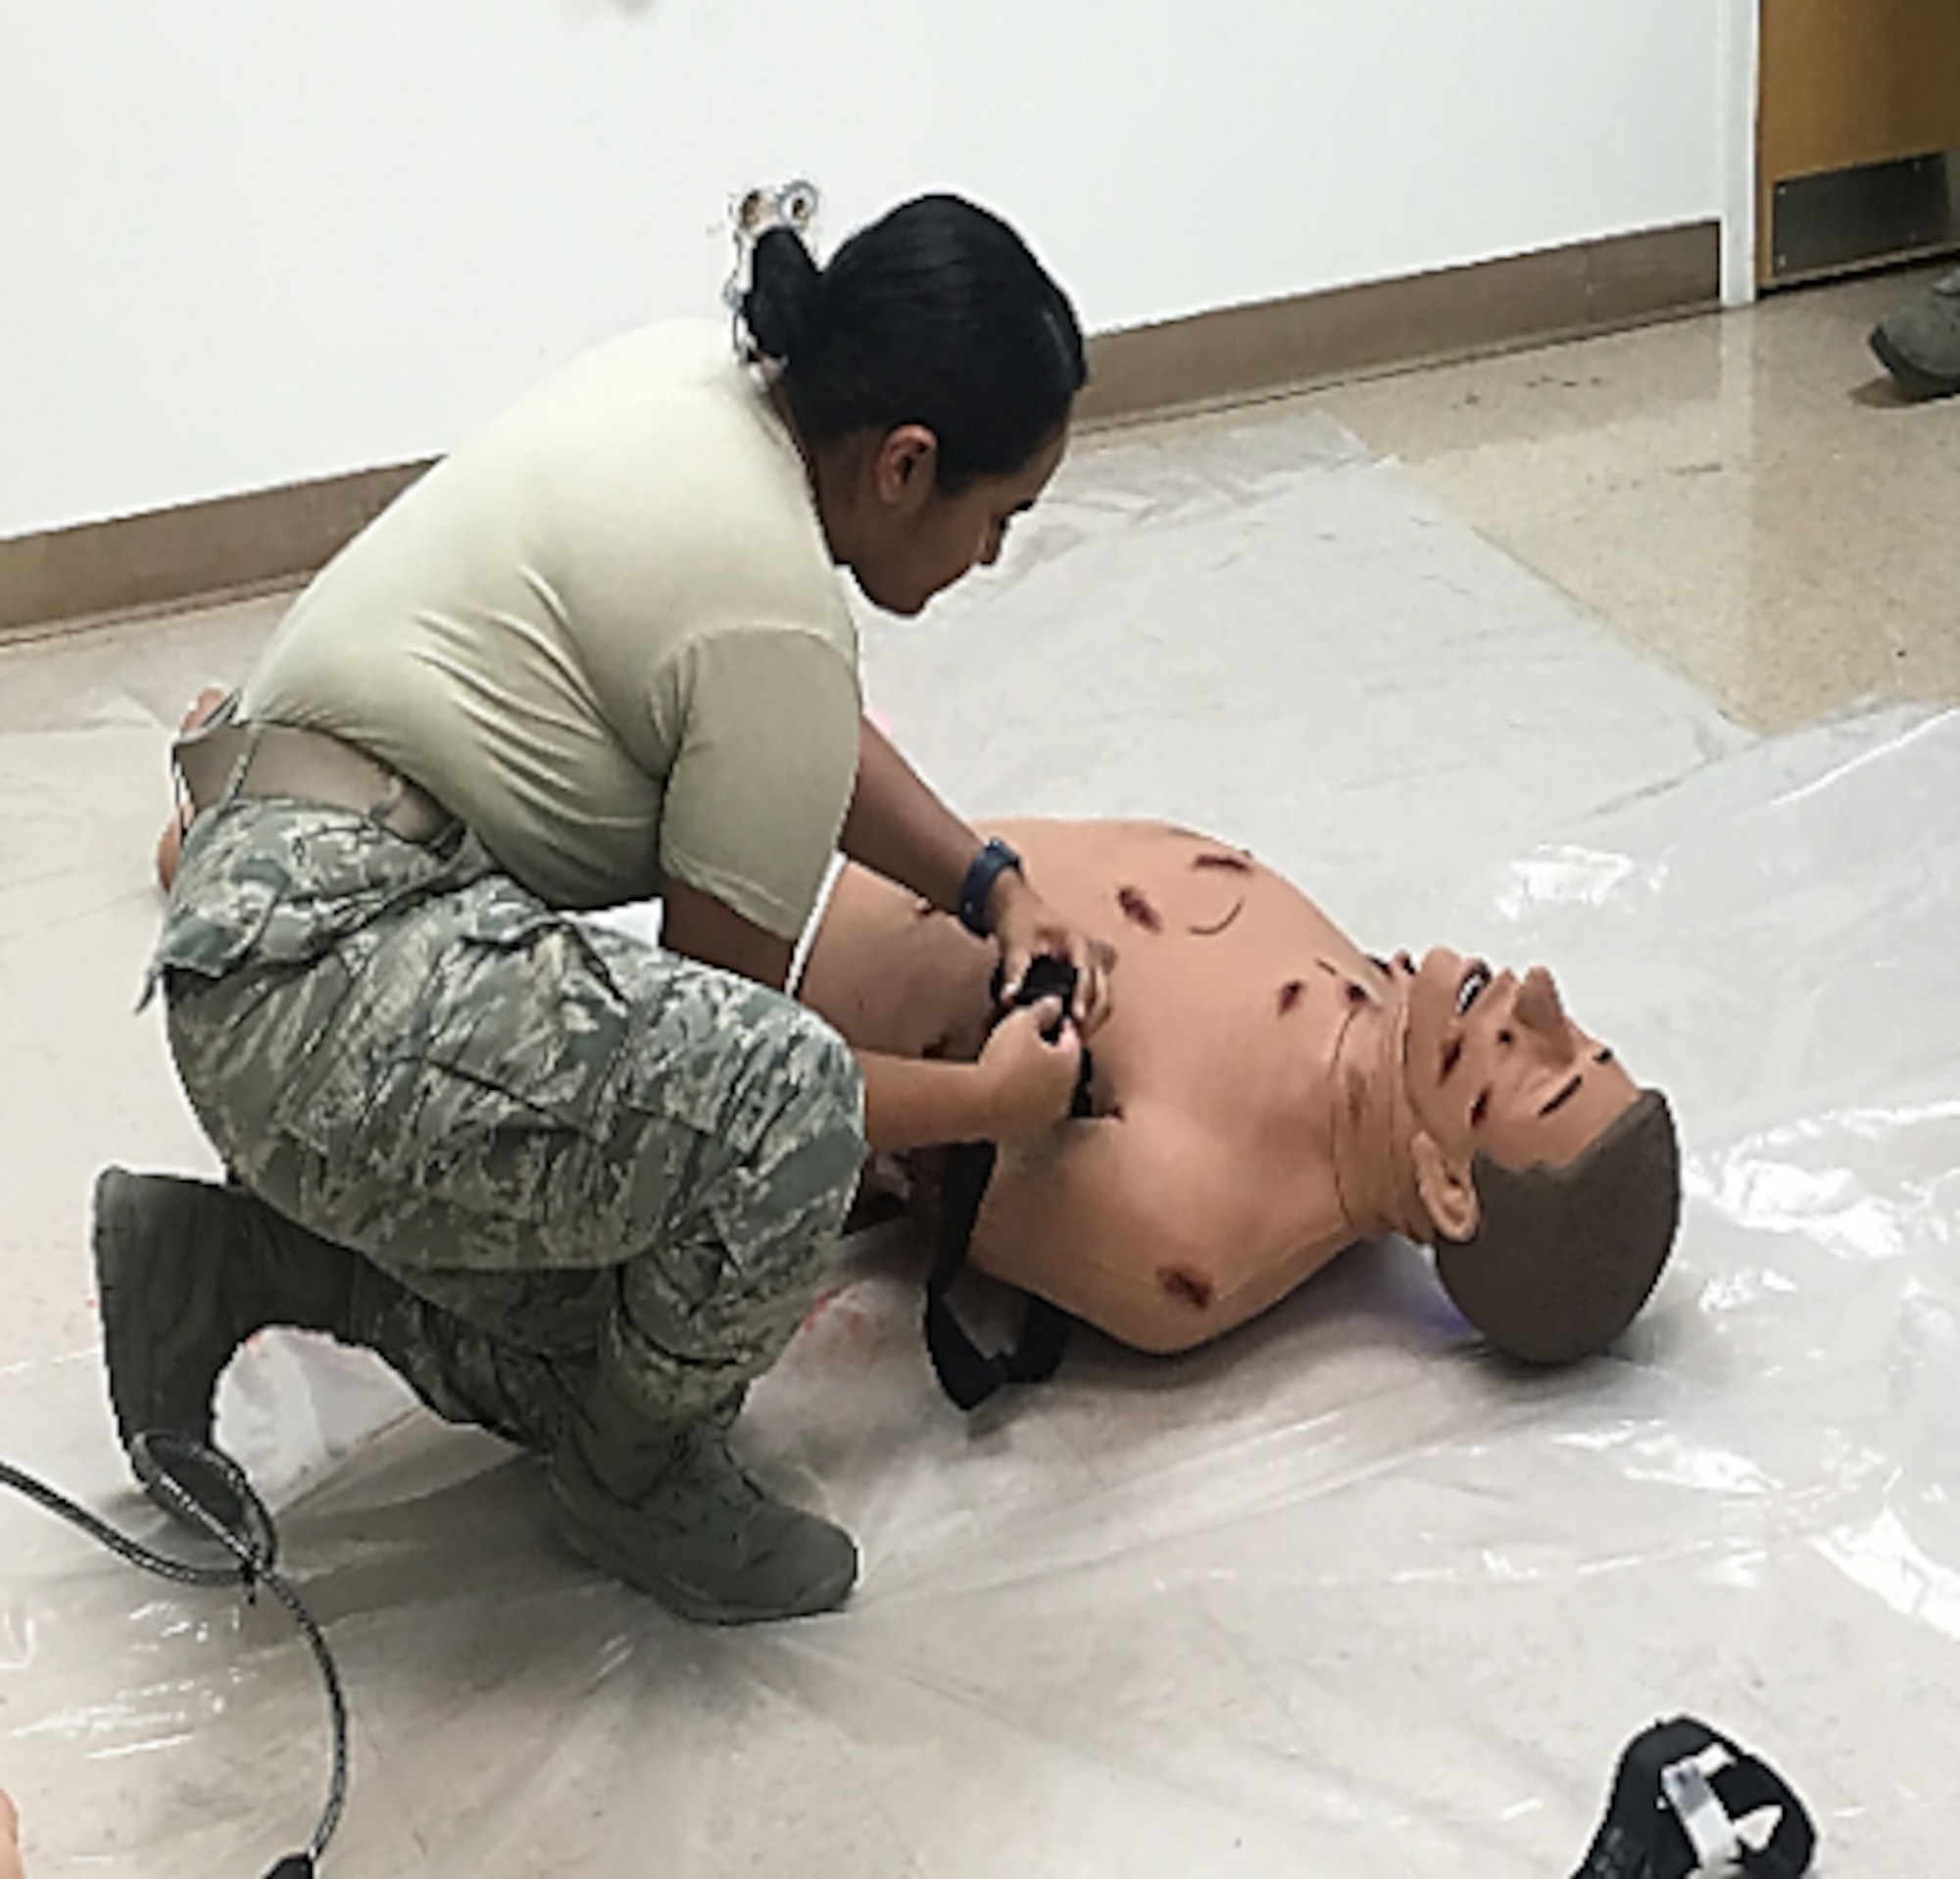 Staff Sgt. Taylor Lopez Boodooram, Active Duty Clinic Office manager, demonstrates tourniquet placement on a manikin’s arm during a National Association of Emergency Medical Technicians Tactical Combat Casualty Care course in the 366th Medical Group Simulation Lab Room at Mountain Home Air Force Base, Idaho, February 2019. TCCC is a standardized course offered across the military to equip warfighters with basic skills to save lives in combat operations. (Courtesy photo)